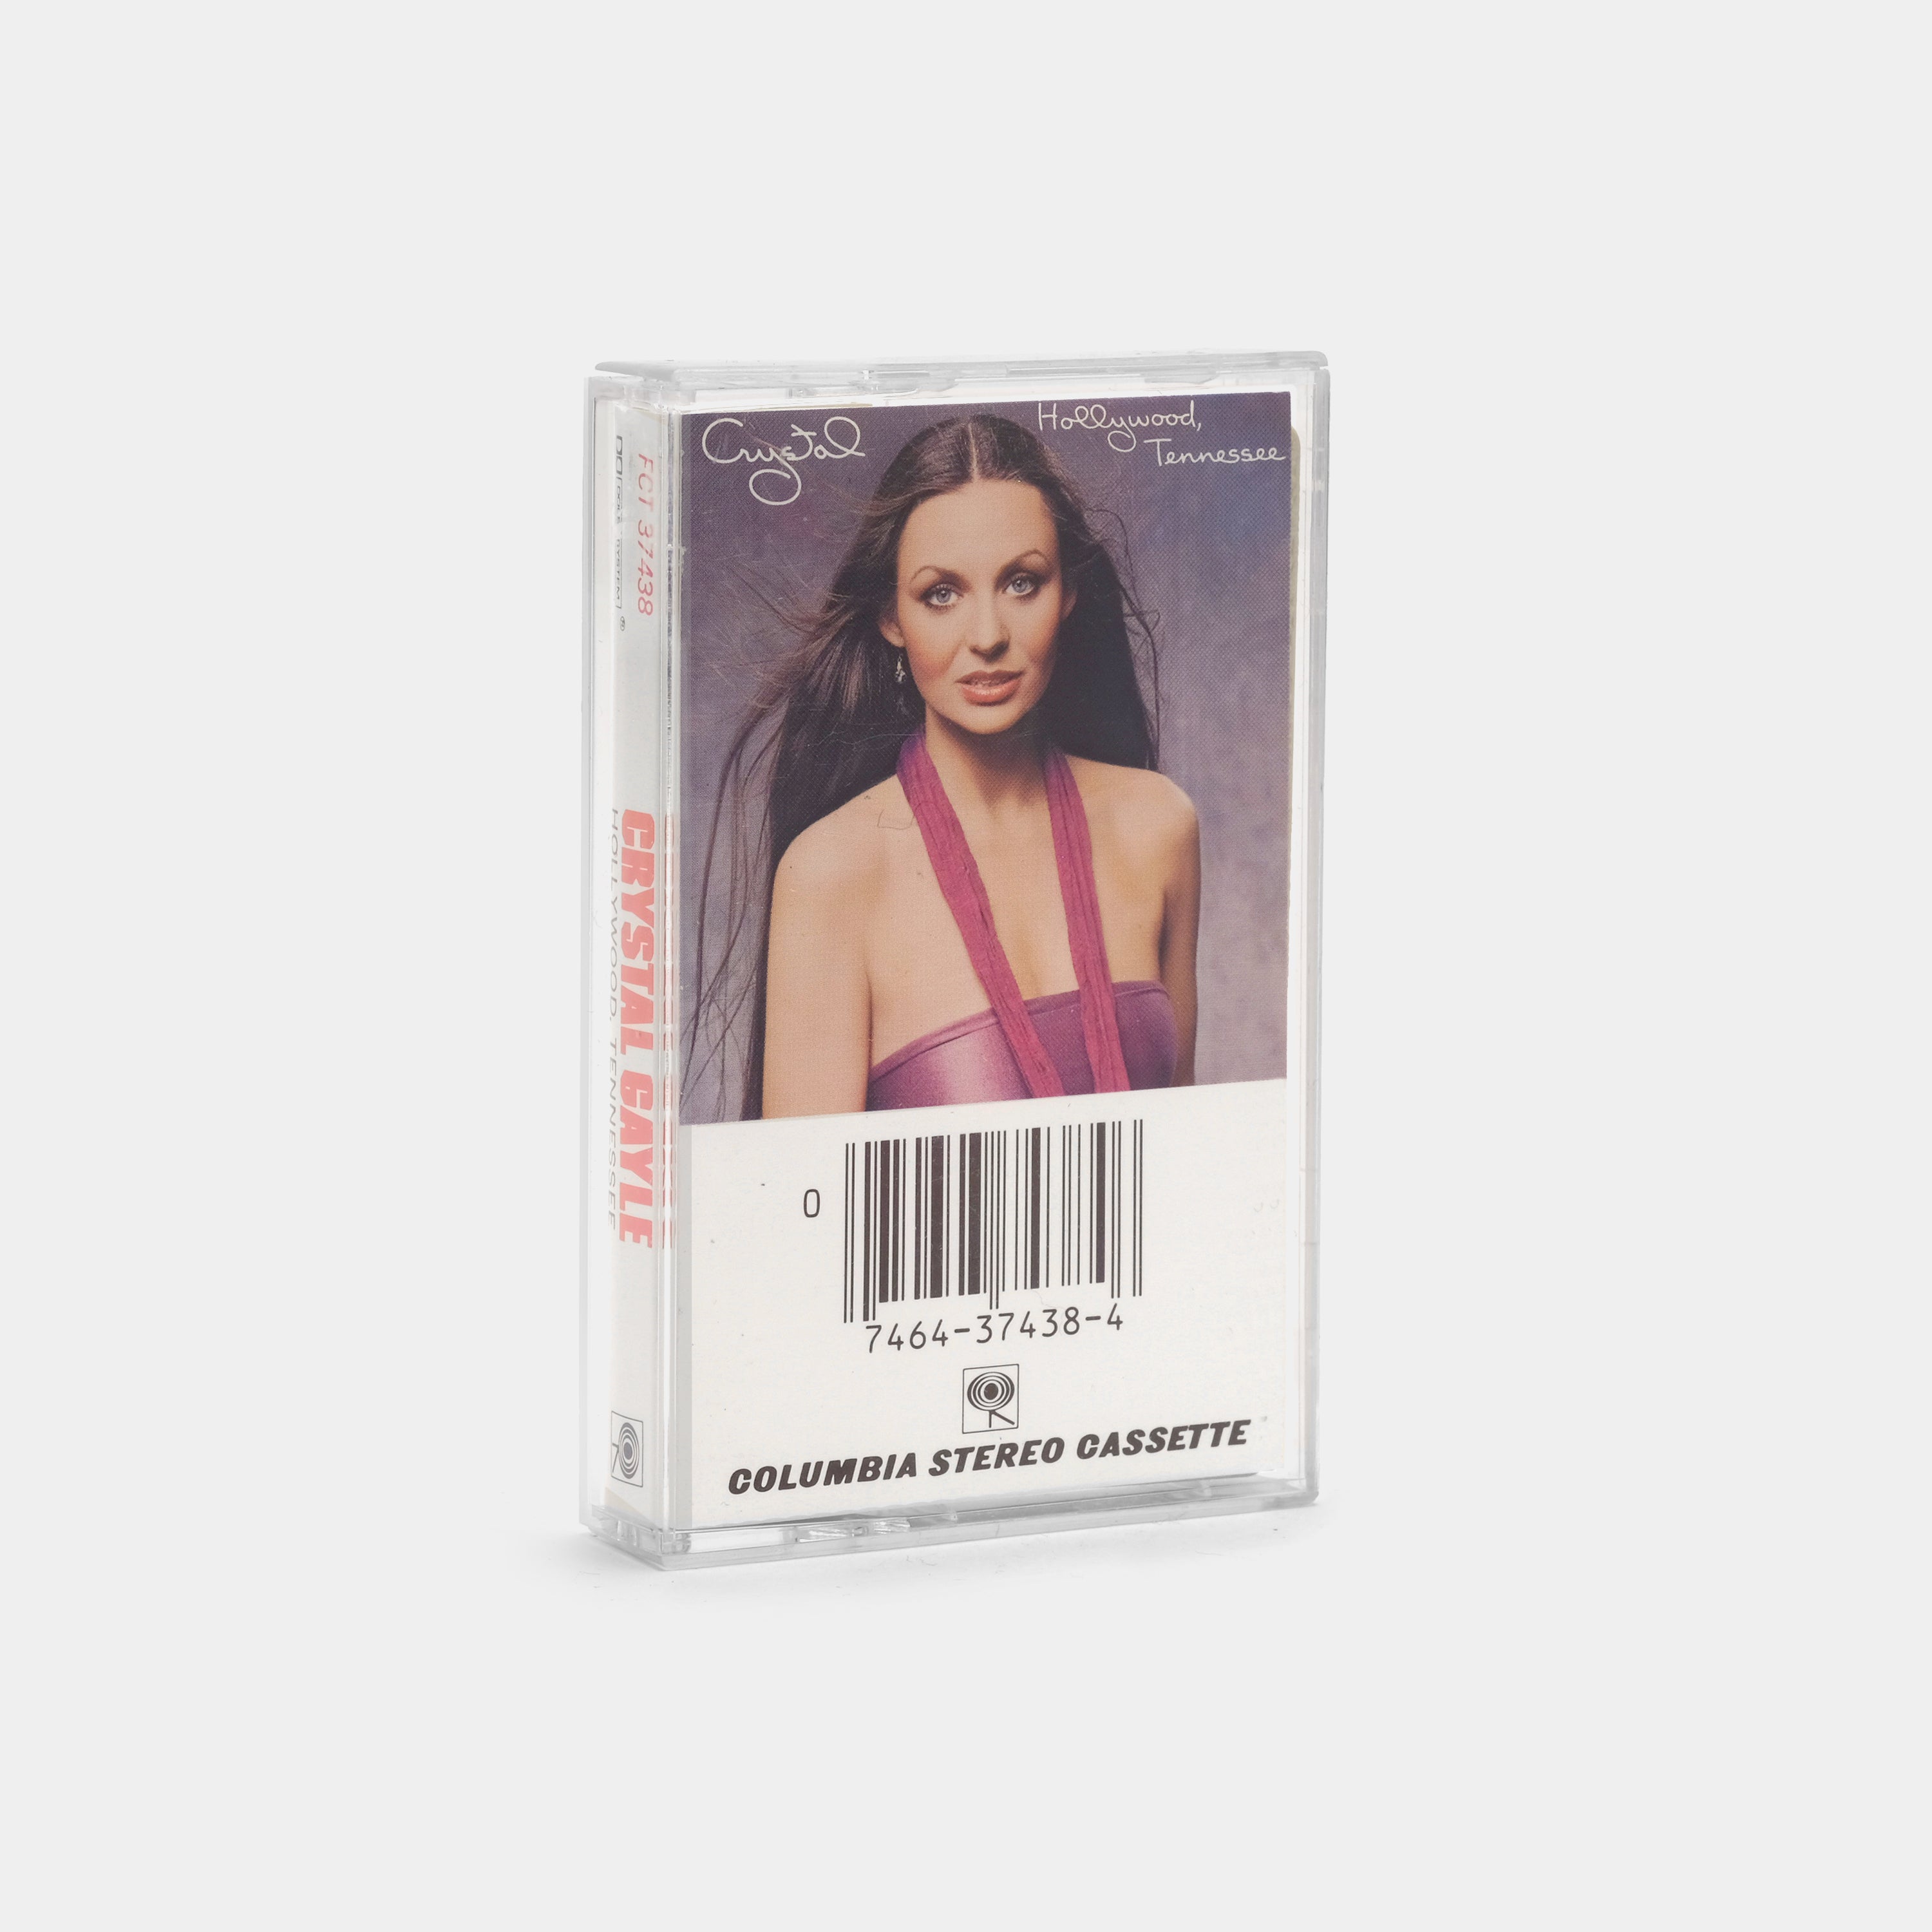 Crystal Gayle - Hollywood, Tennessee Cassette Tape